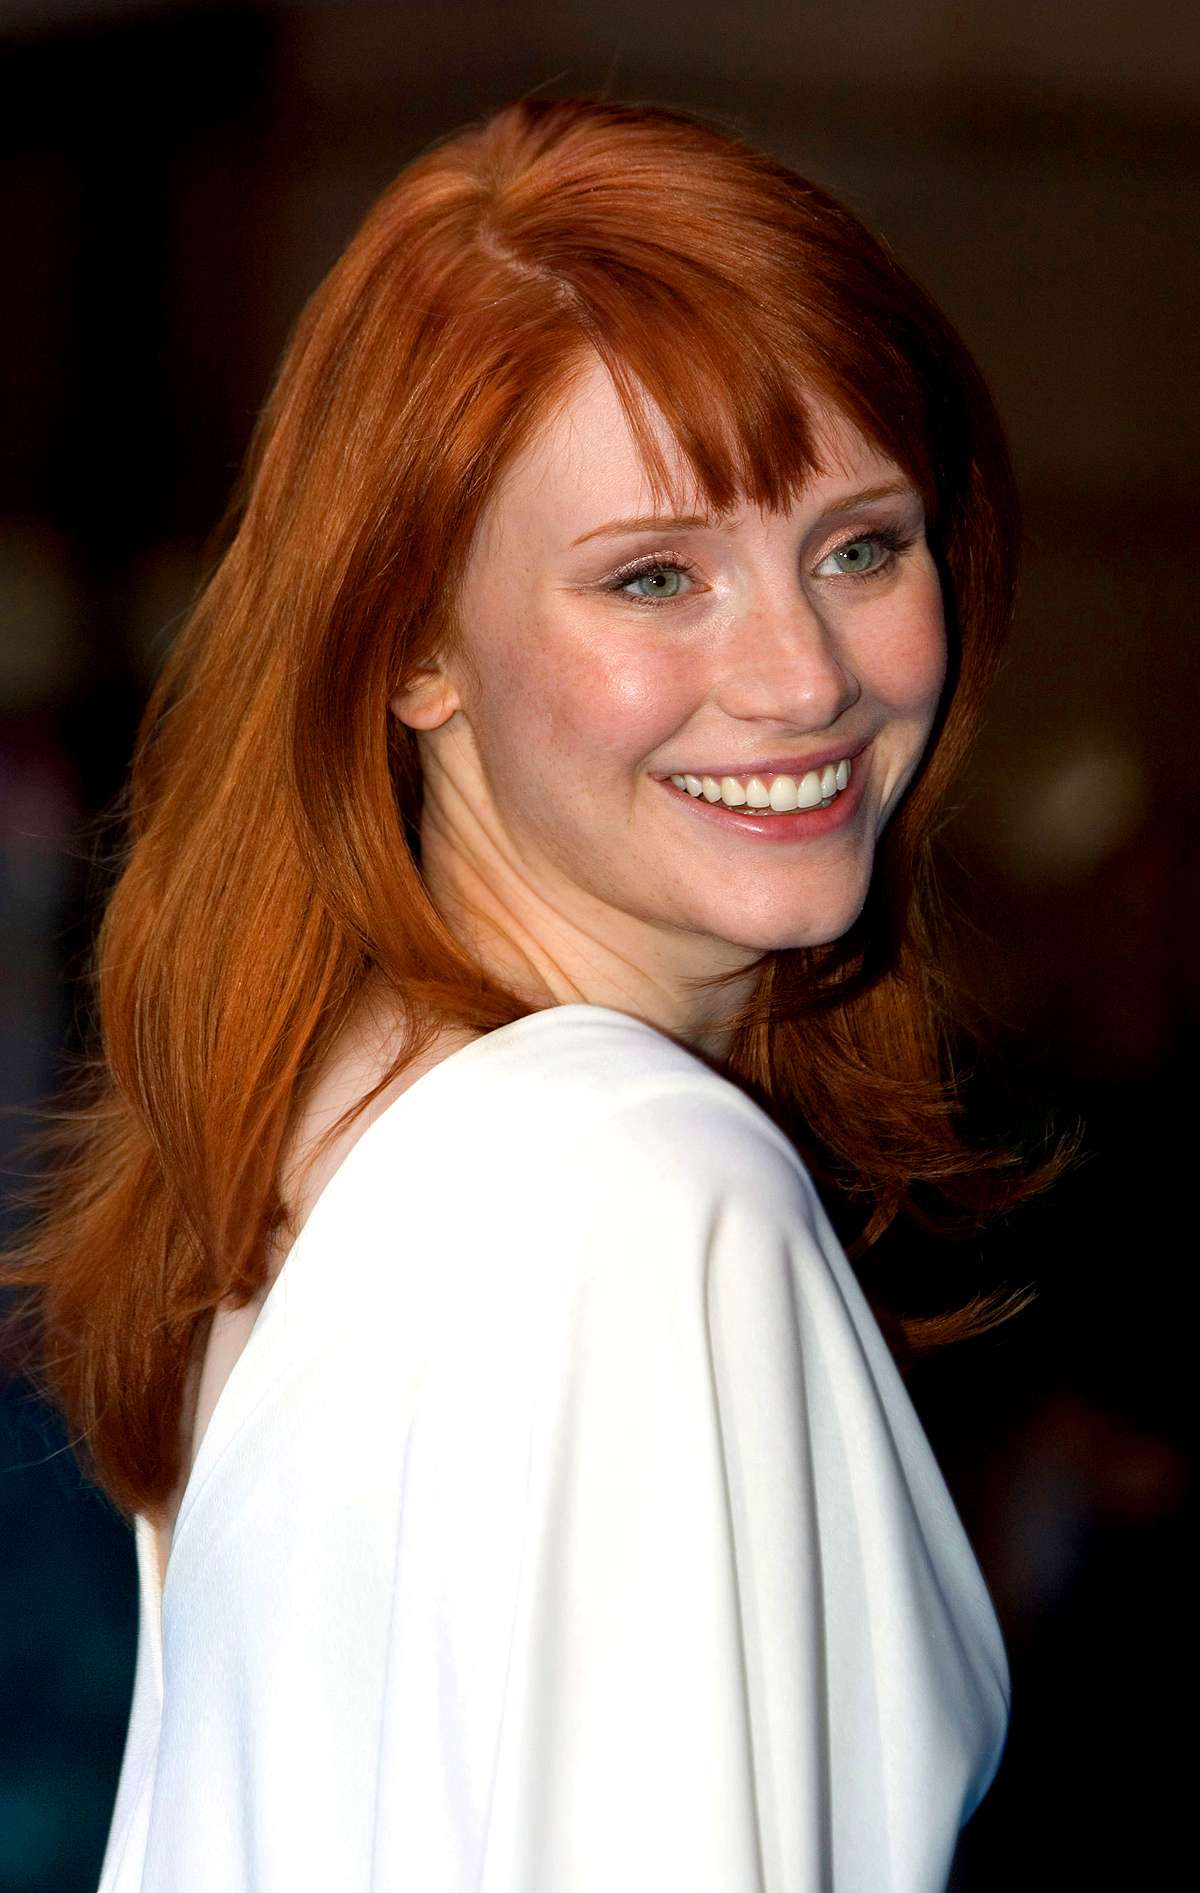 Watch Bryce Dallas Howard's musical PSA: 'I am not Jessica Chastain' |  